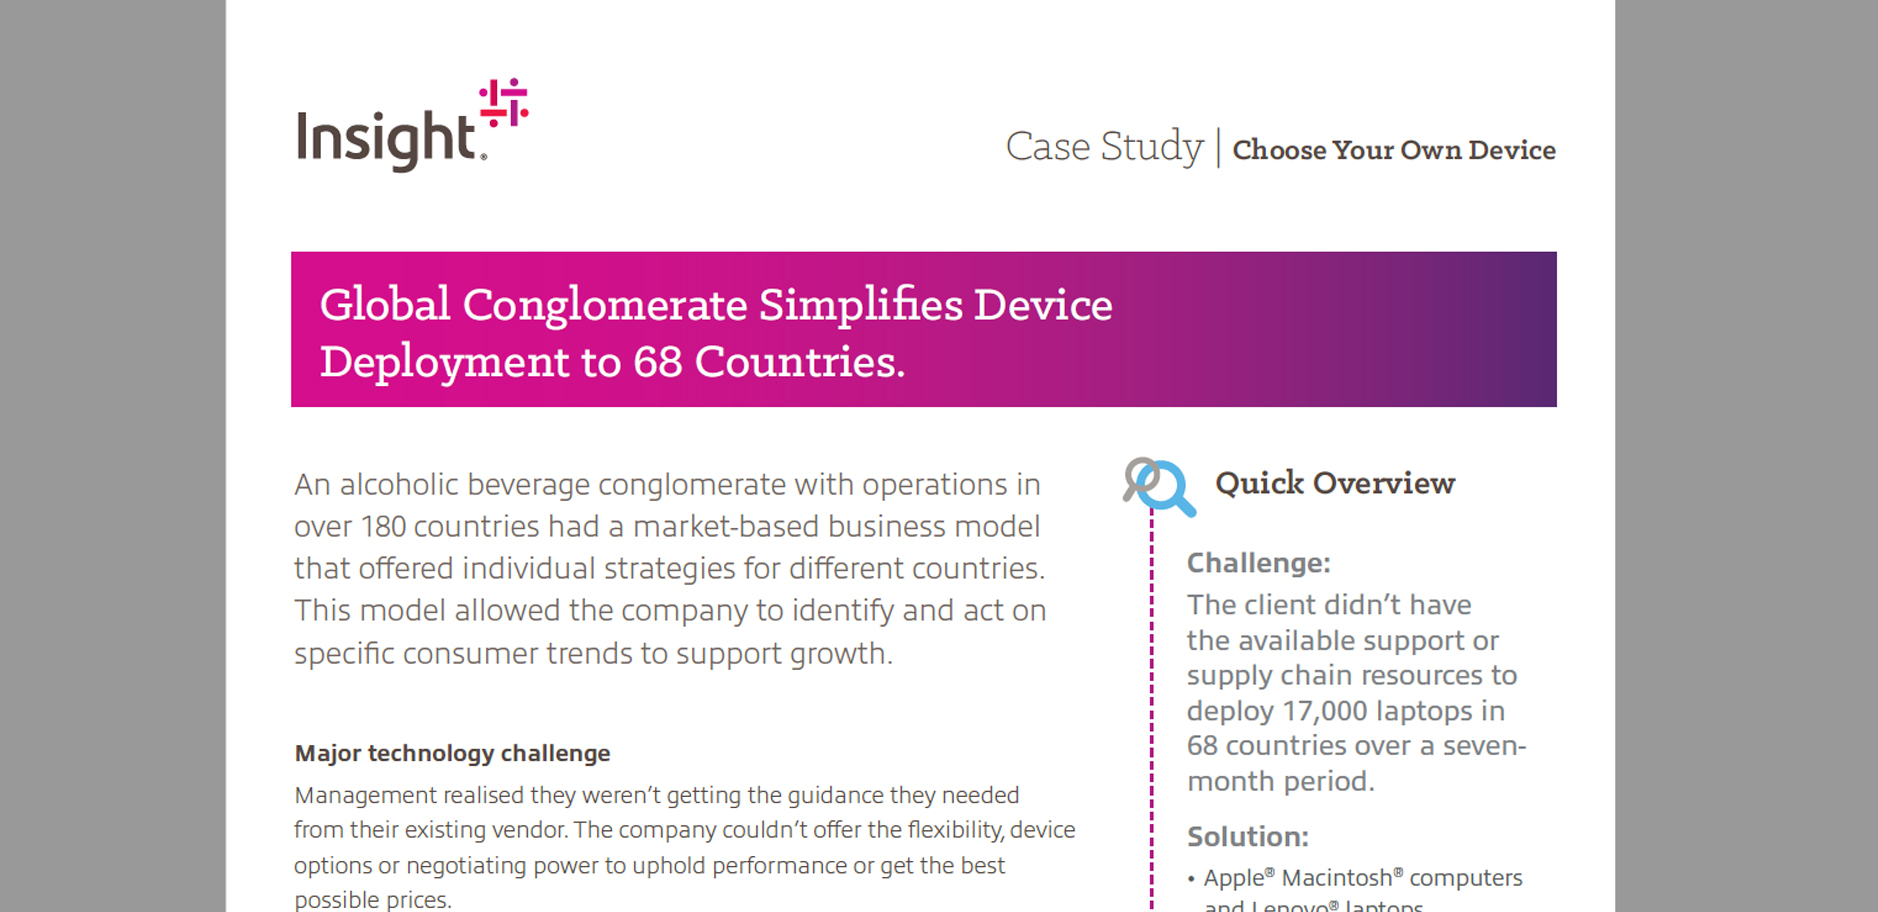 Download the simplifying device deployment case study below